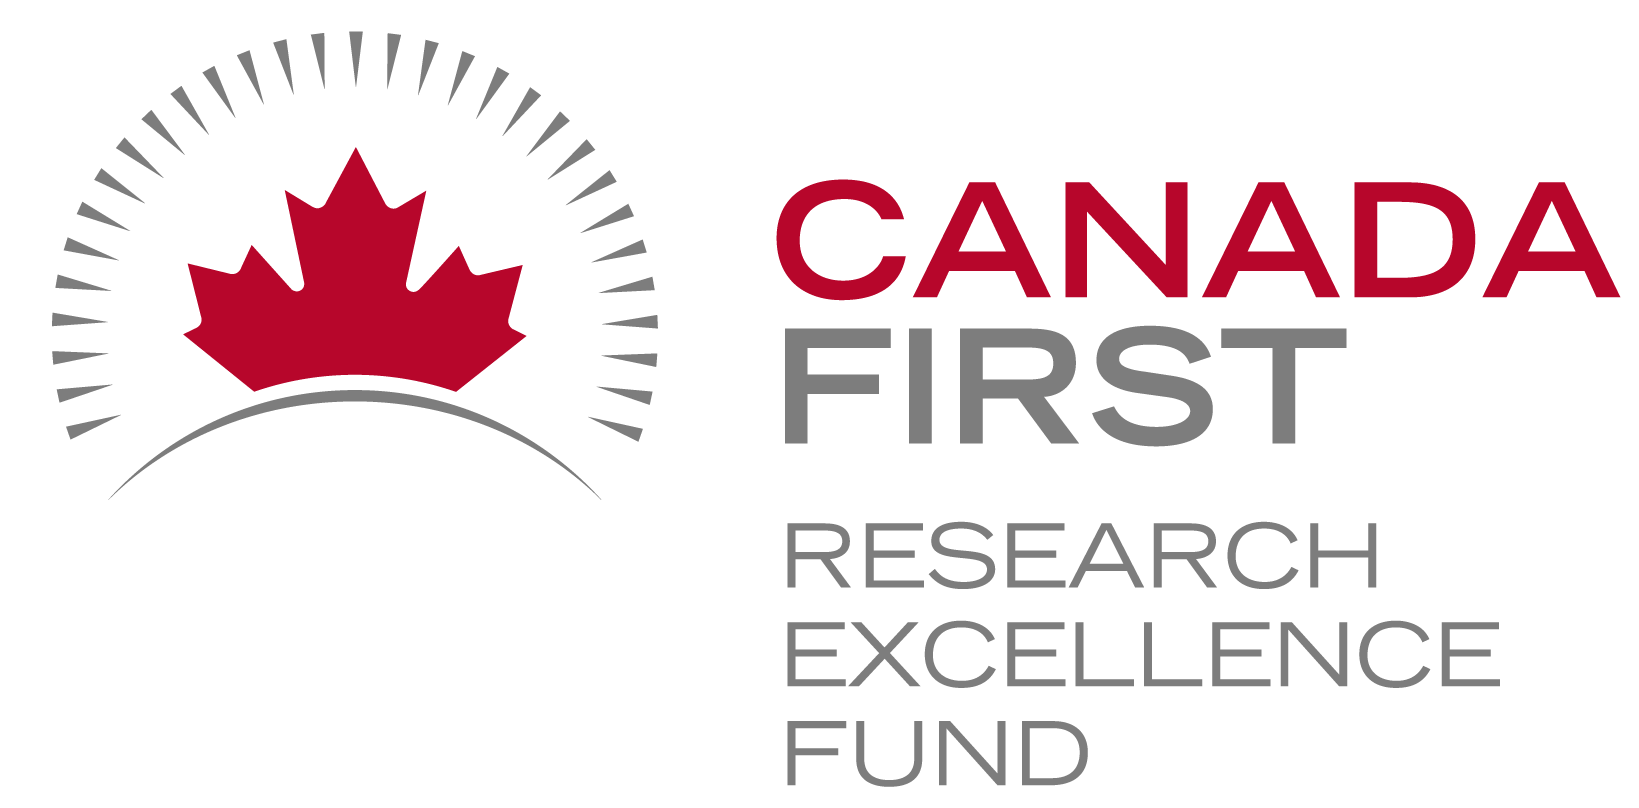 Canada First Research Excellence Fund logo